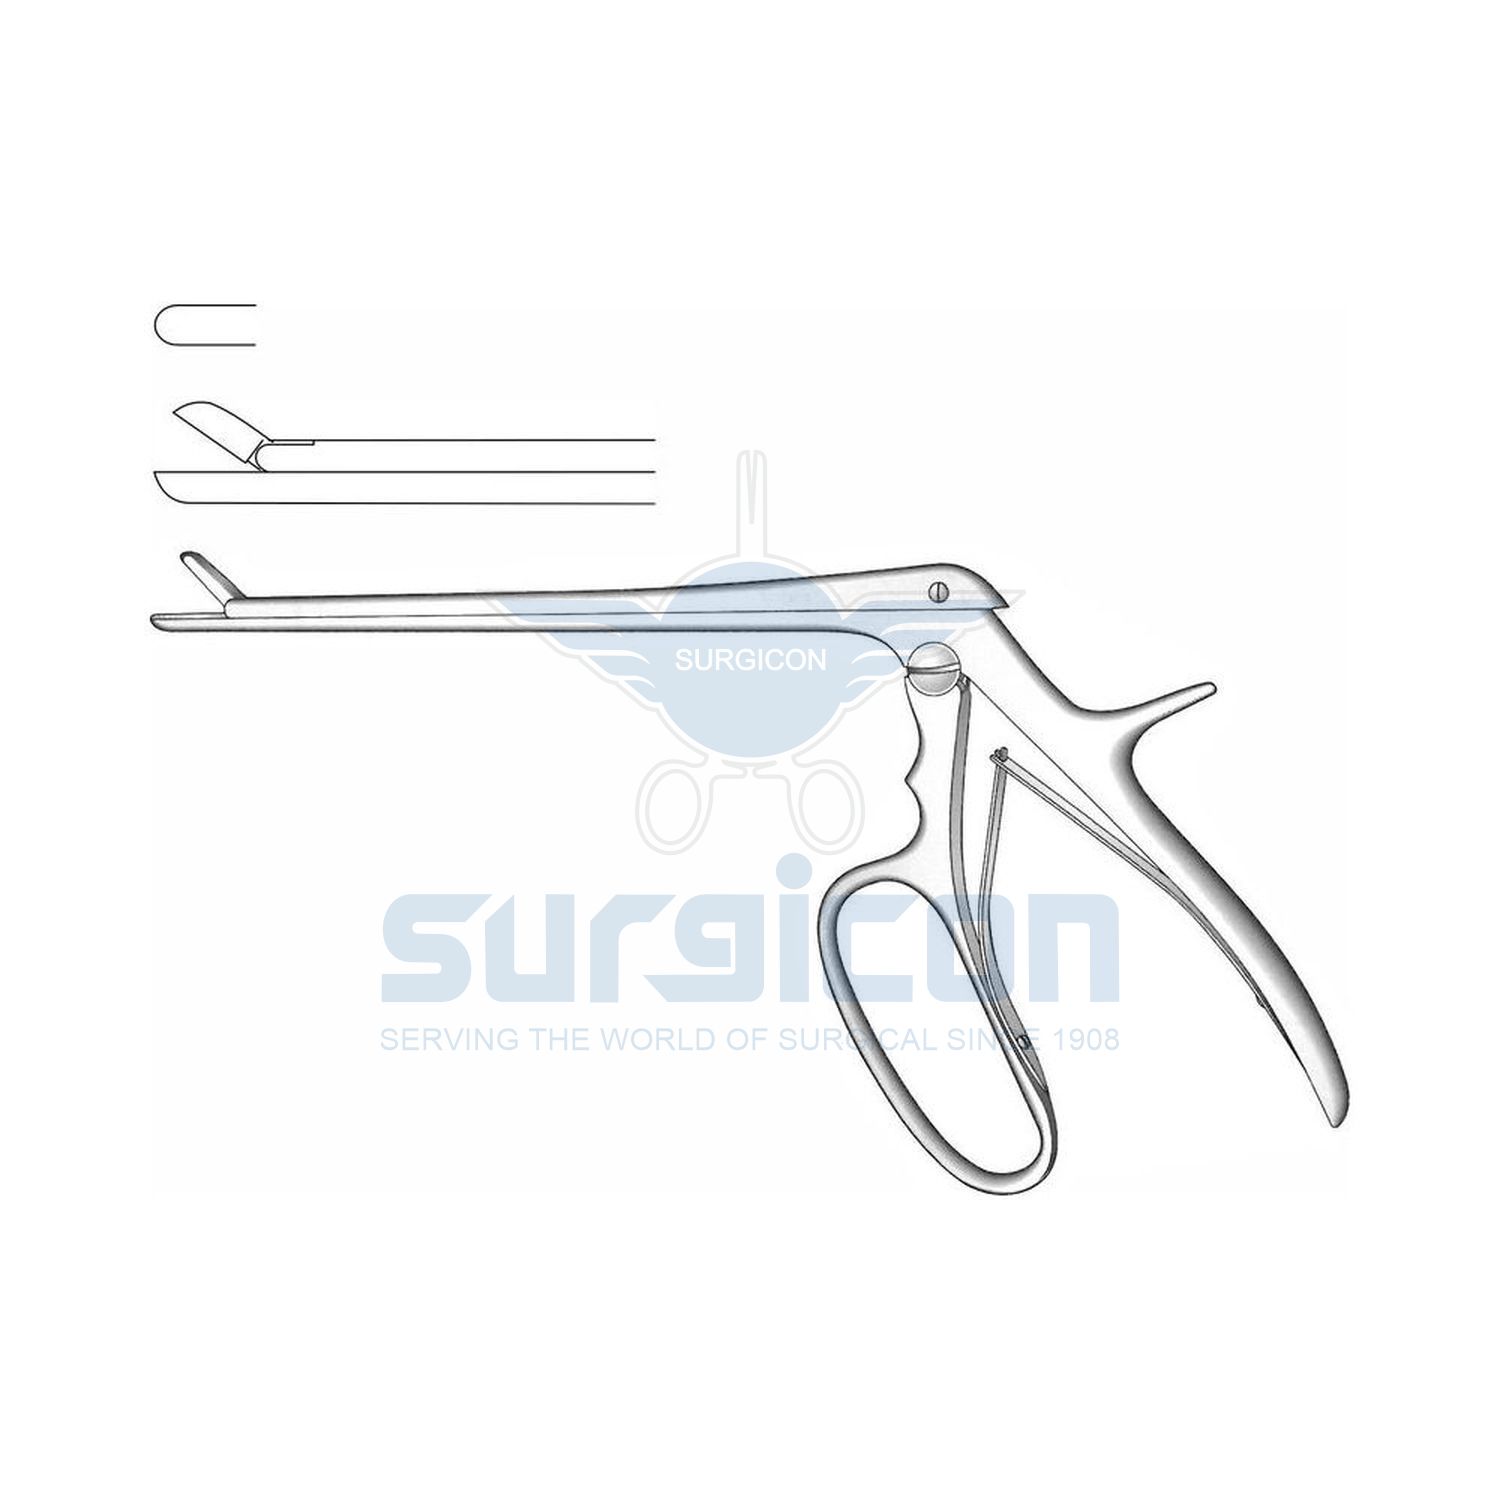 Ferris-Smith-Chusing-Punches-and-Rongeur-Forcep-J-32-1087